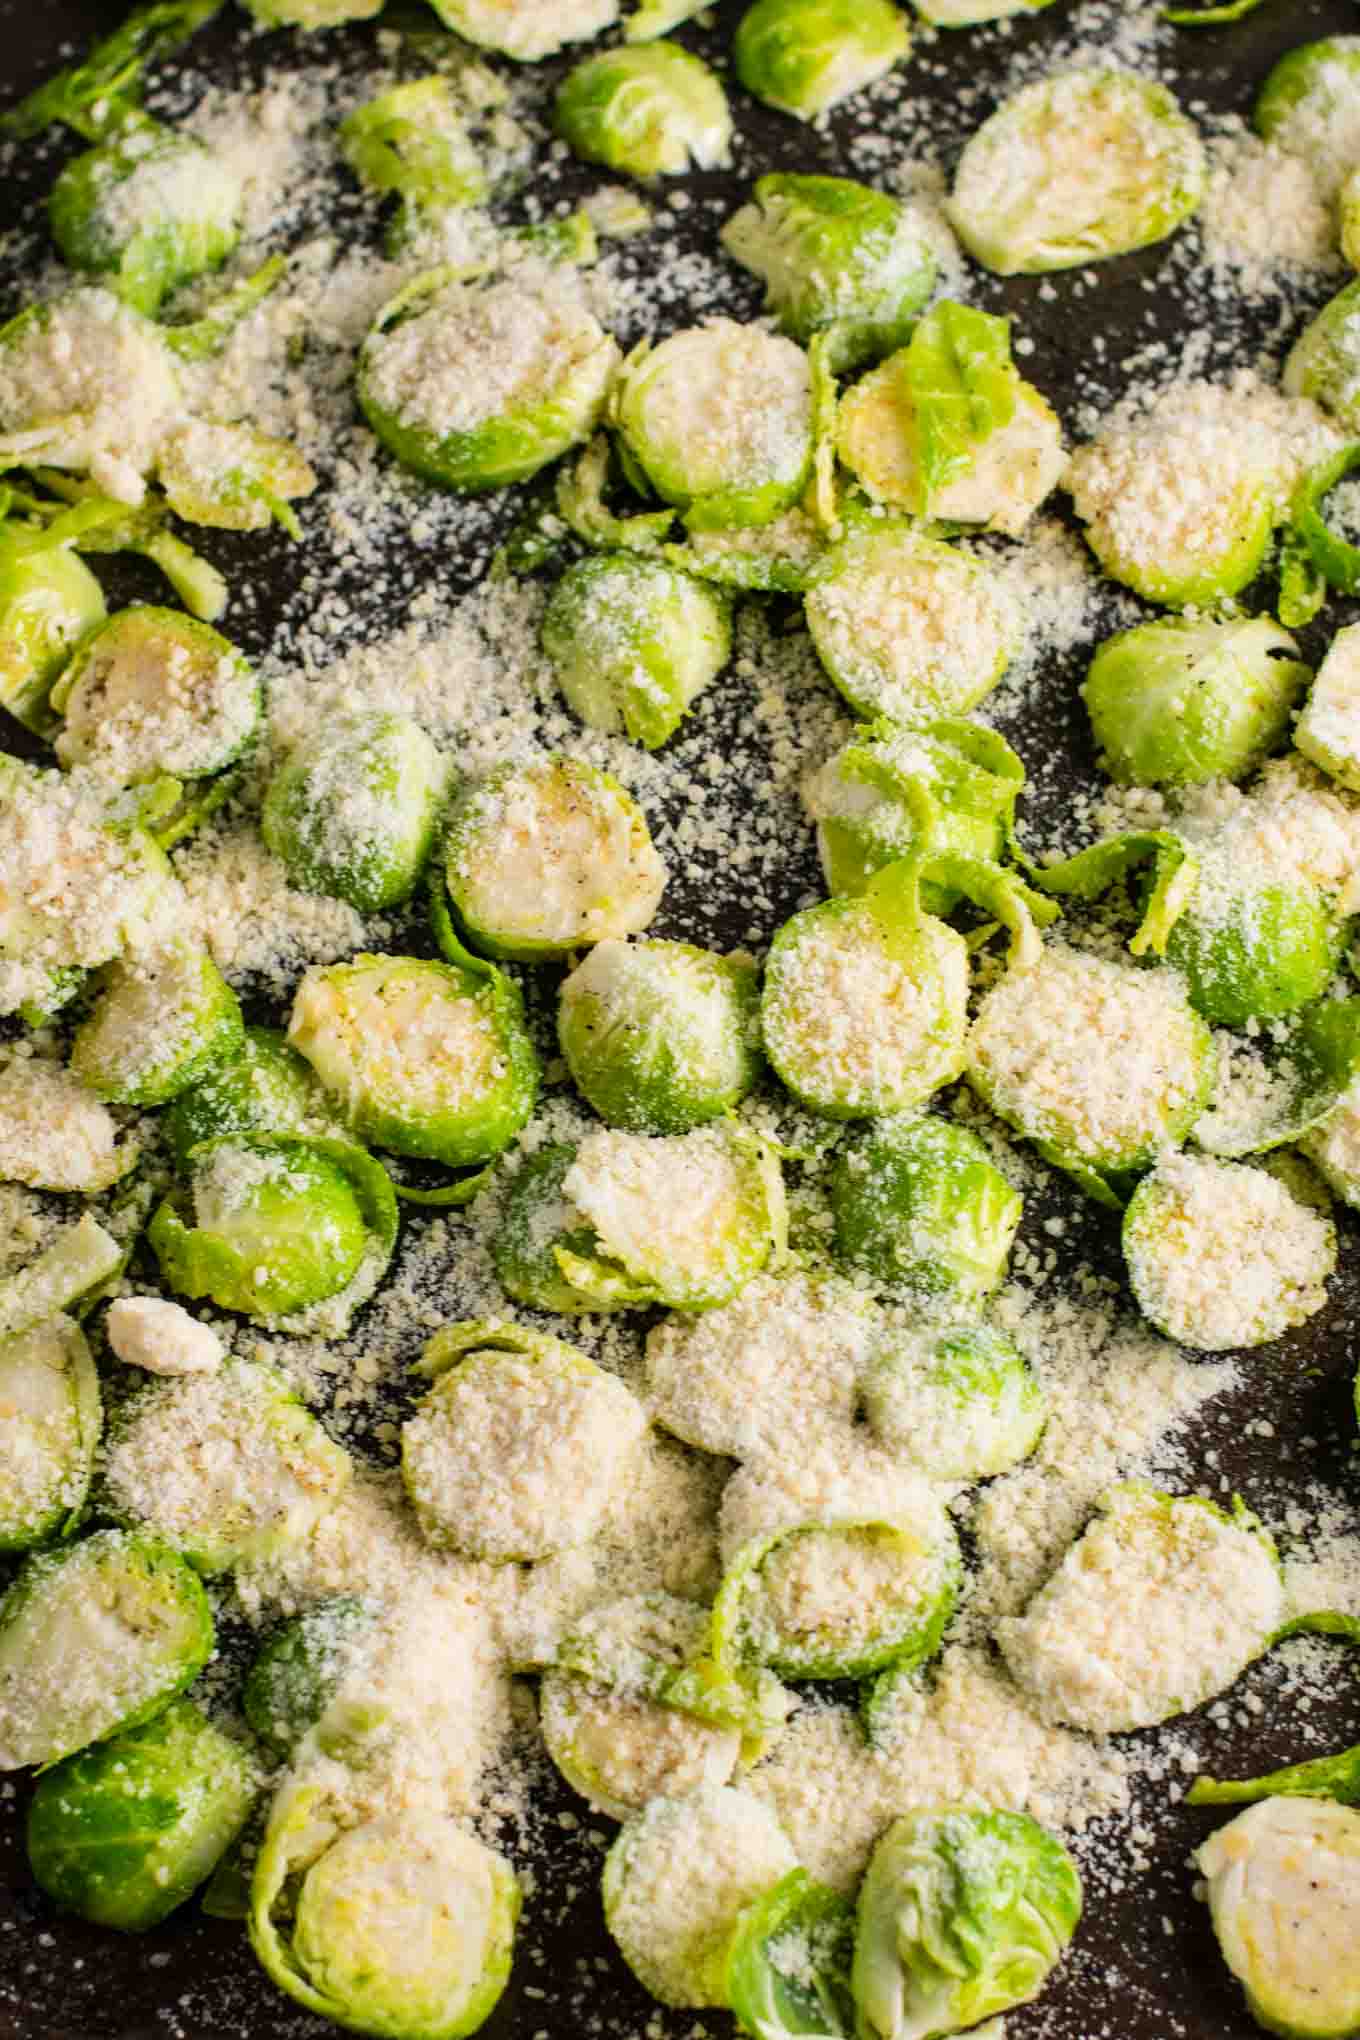 brussel sprouts chips these are so good I could eat the whole pan myself! #brusselsprouts #brusselsproutchips #dinner #sidedish #vegetarian